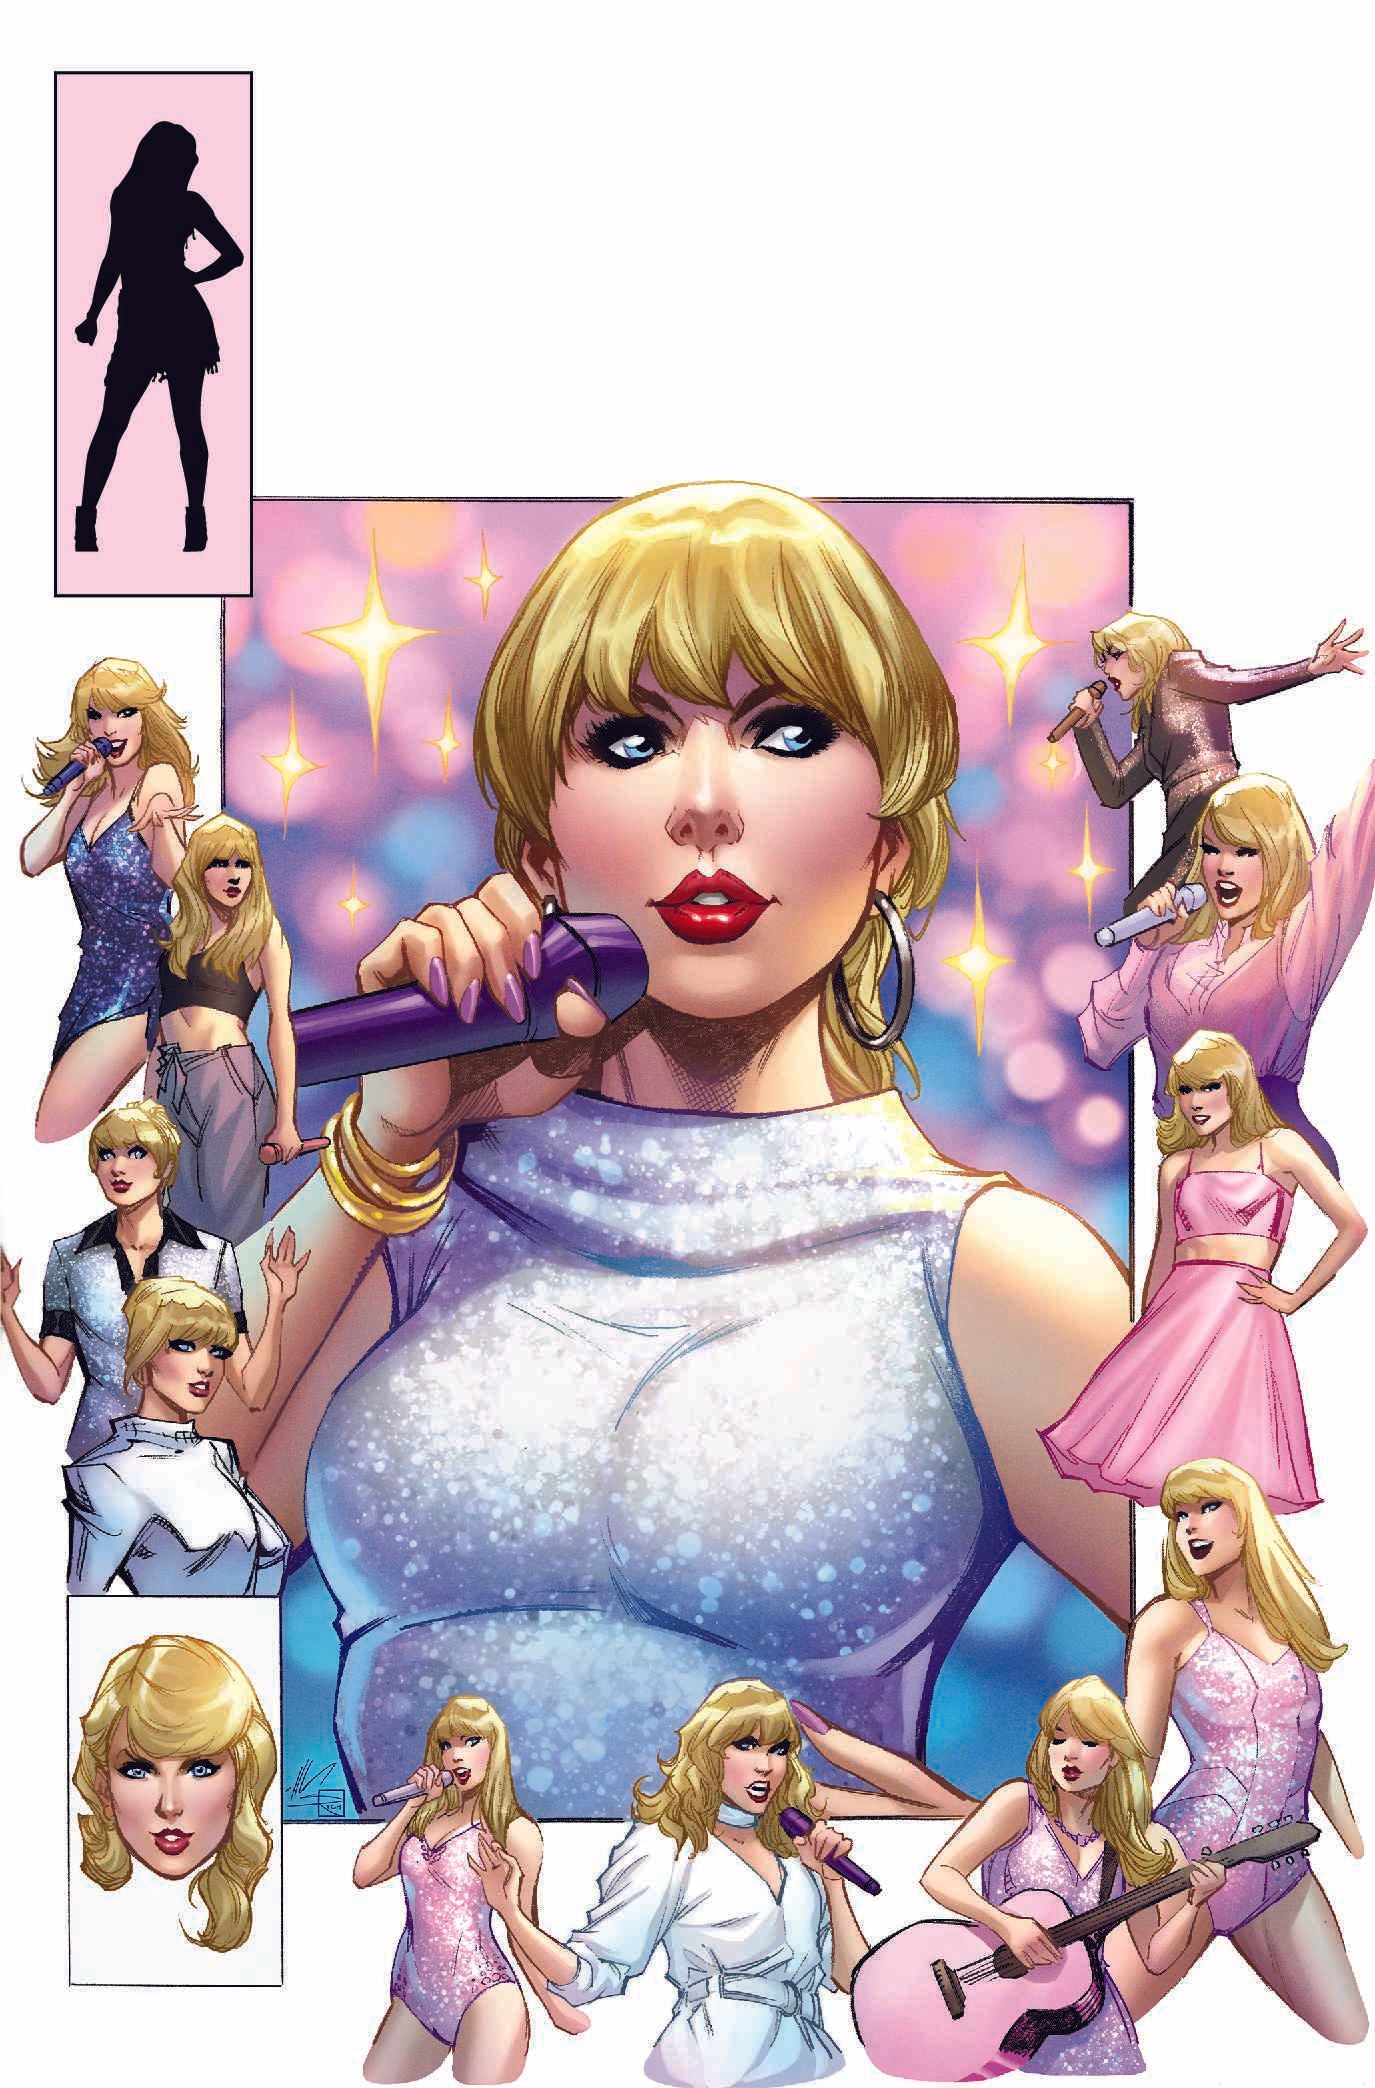 FEMALE FORCE: TAYLOR SWIFT #2 - ALE GARZA ART ONLY - LIMITED TO 250